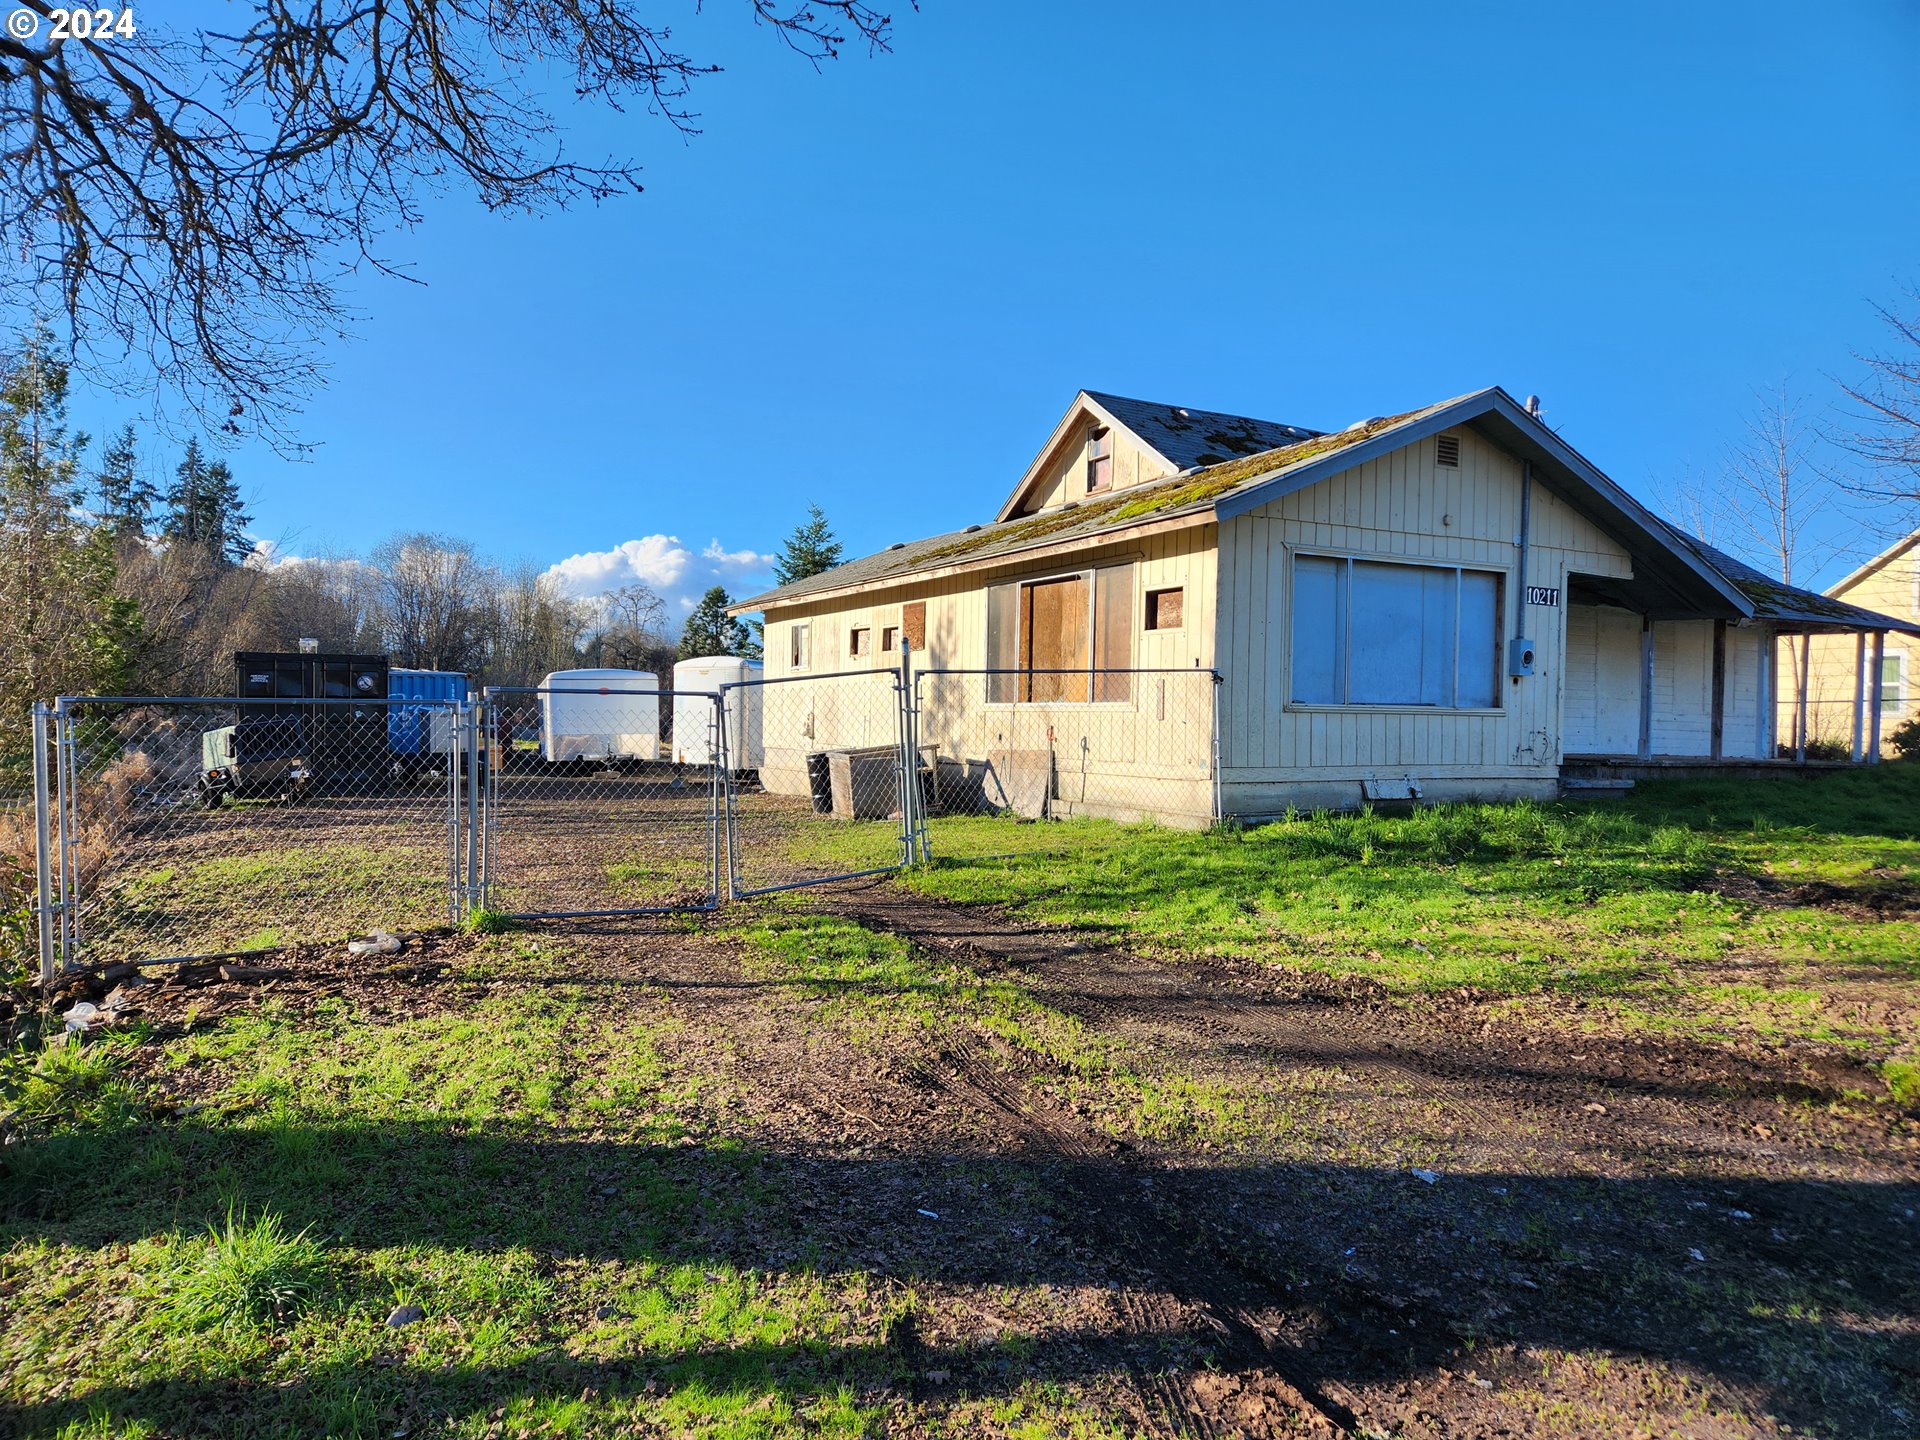 10211 NW 314TH AVE, North Plains, OR 97133